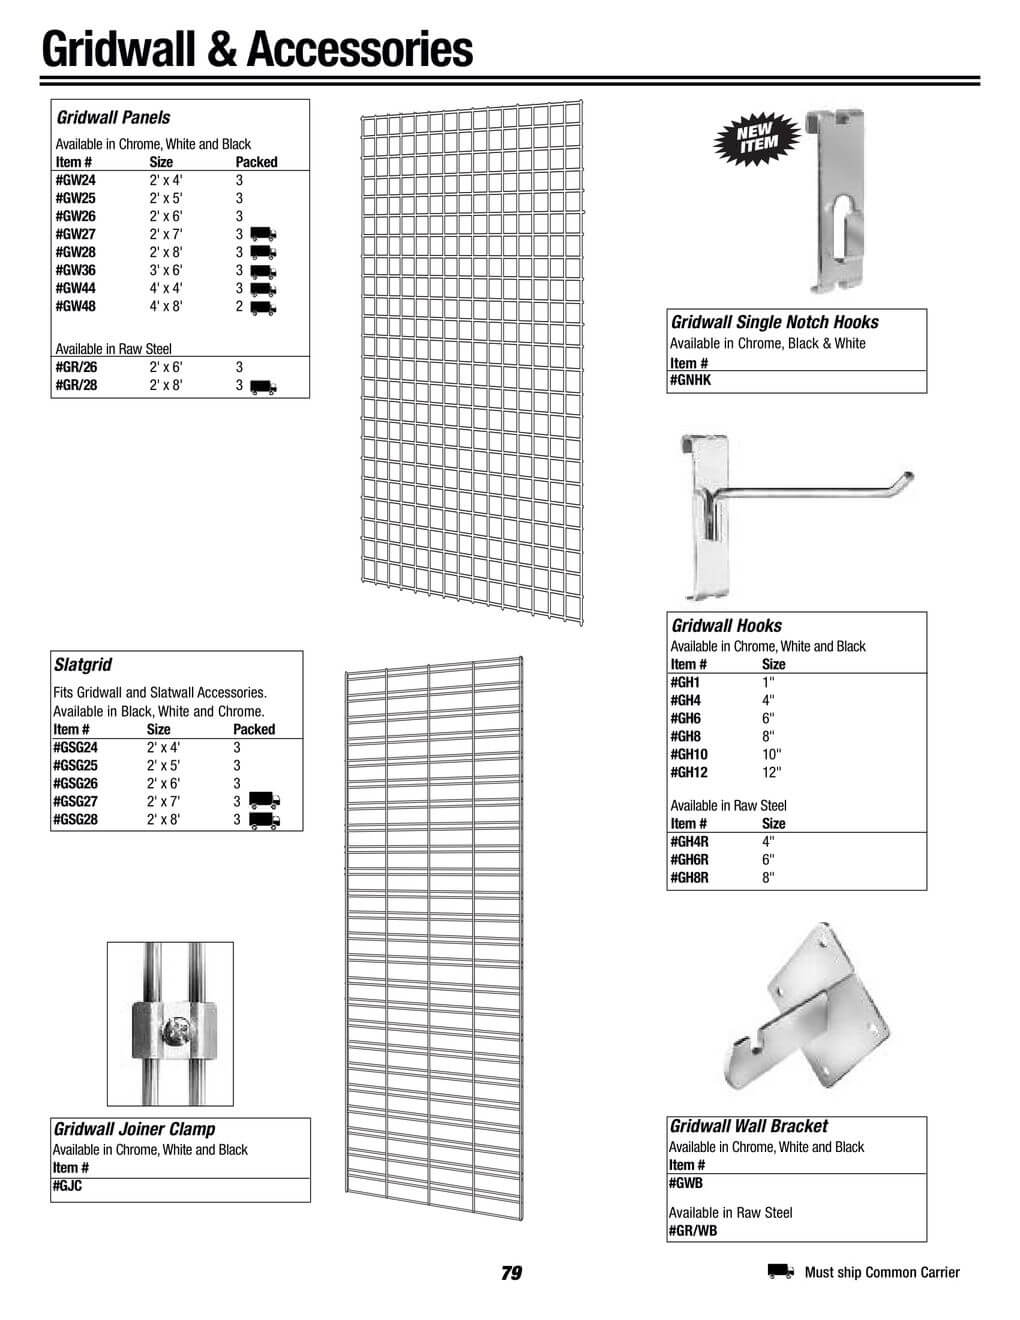 gridwall panels and accessories